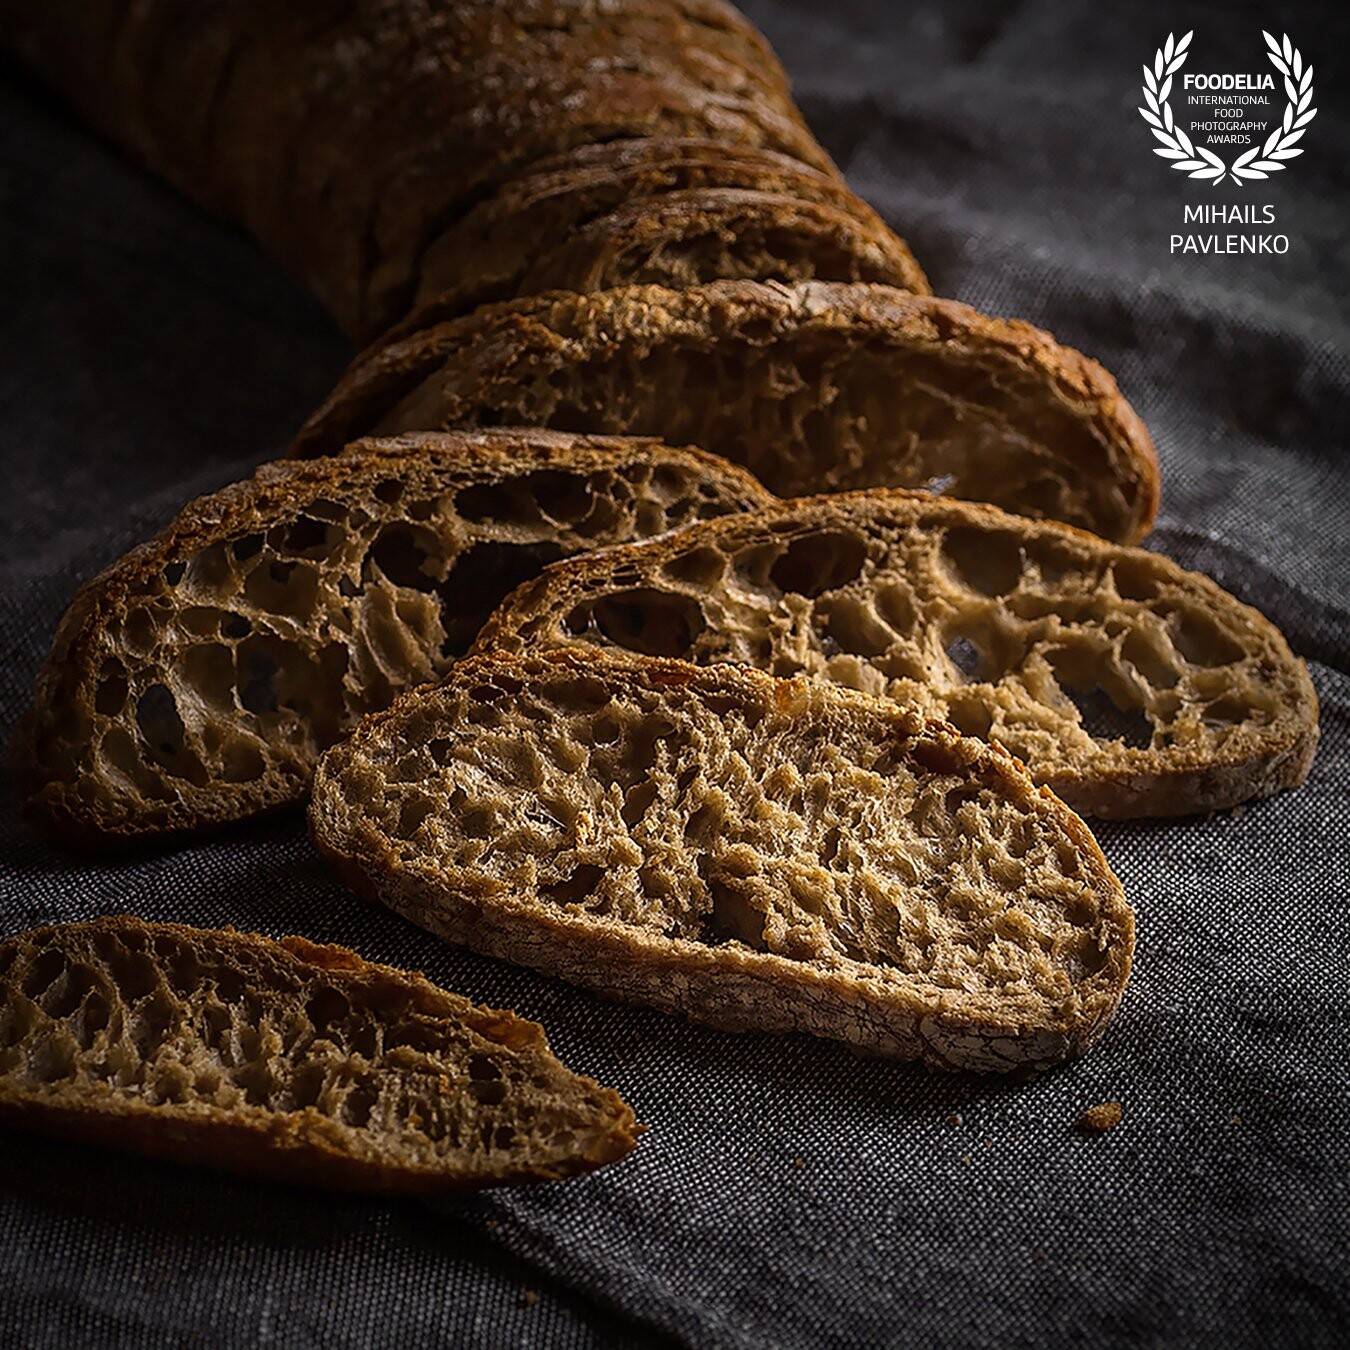 Ciabatta. Can you smell it? The smell of freshly baked bread is most recognizable and memorable. The Ciabatta was invented in 1982.<br />
iso160 f 1/7 1/160